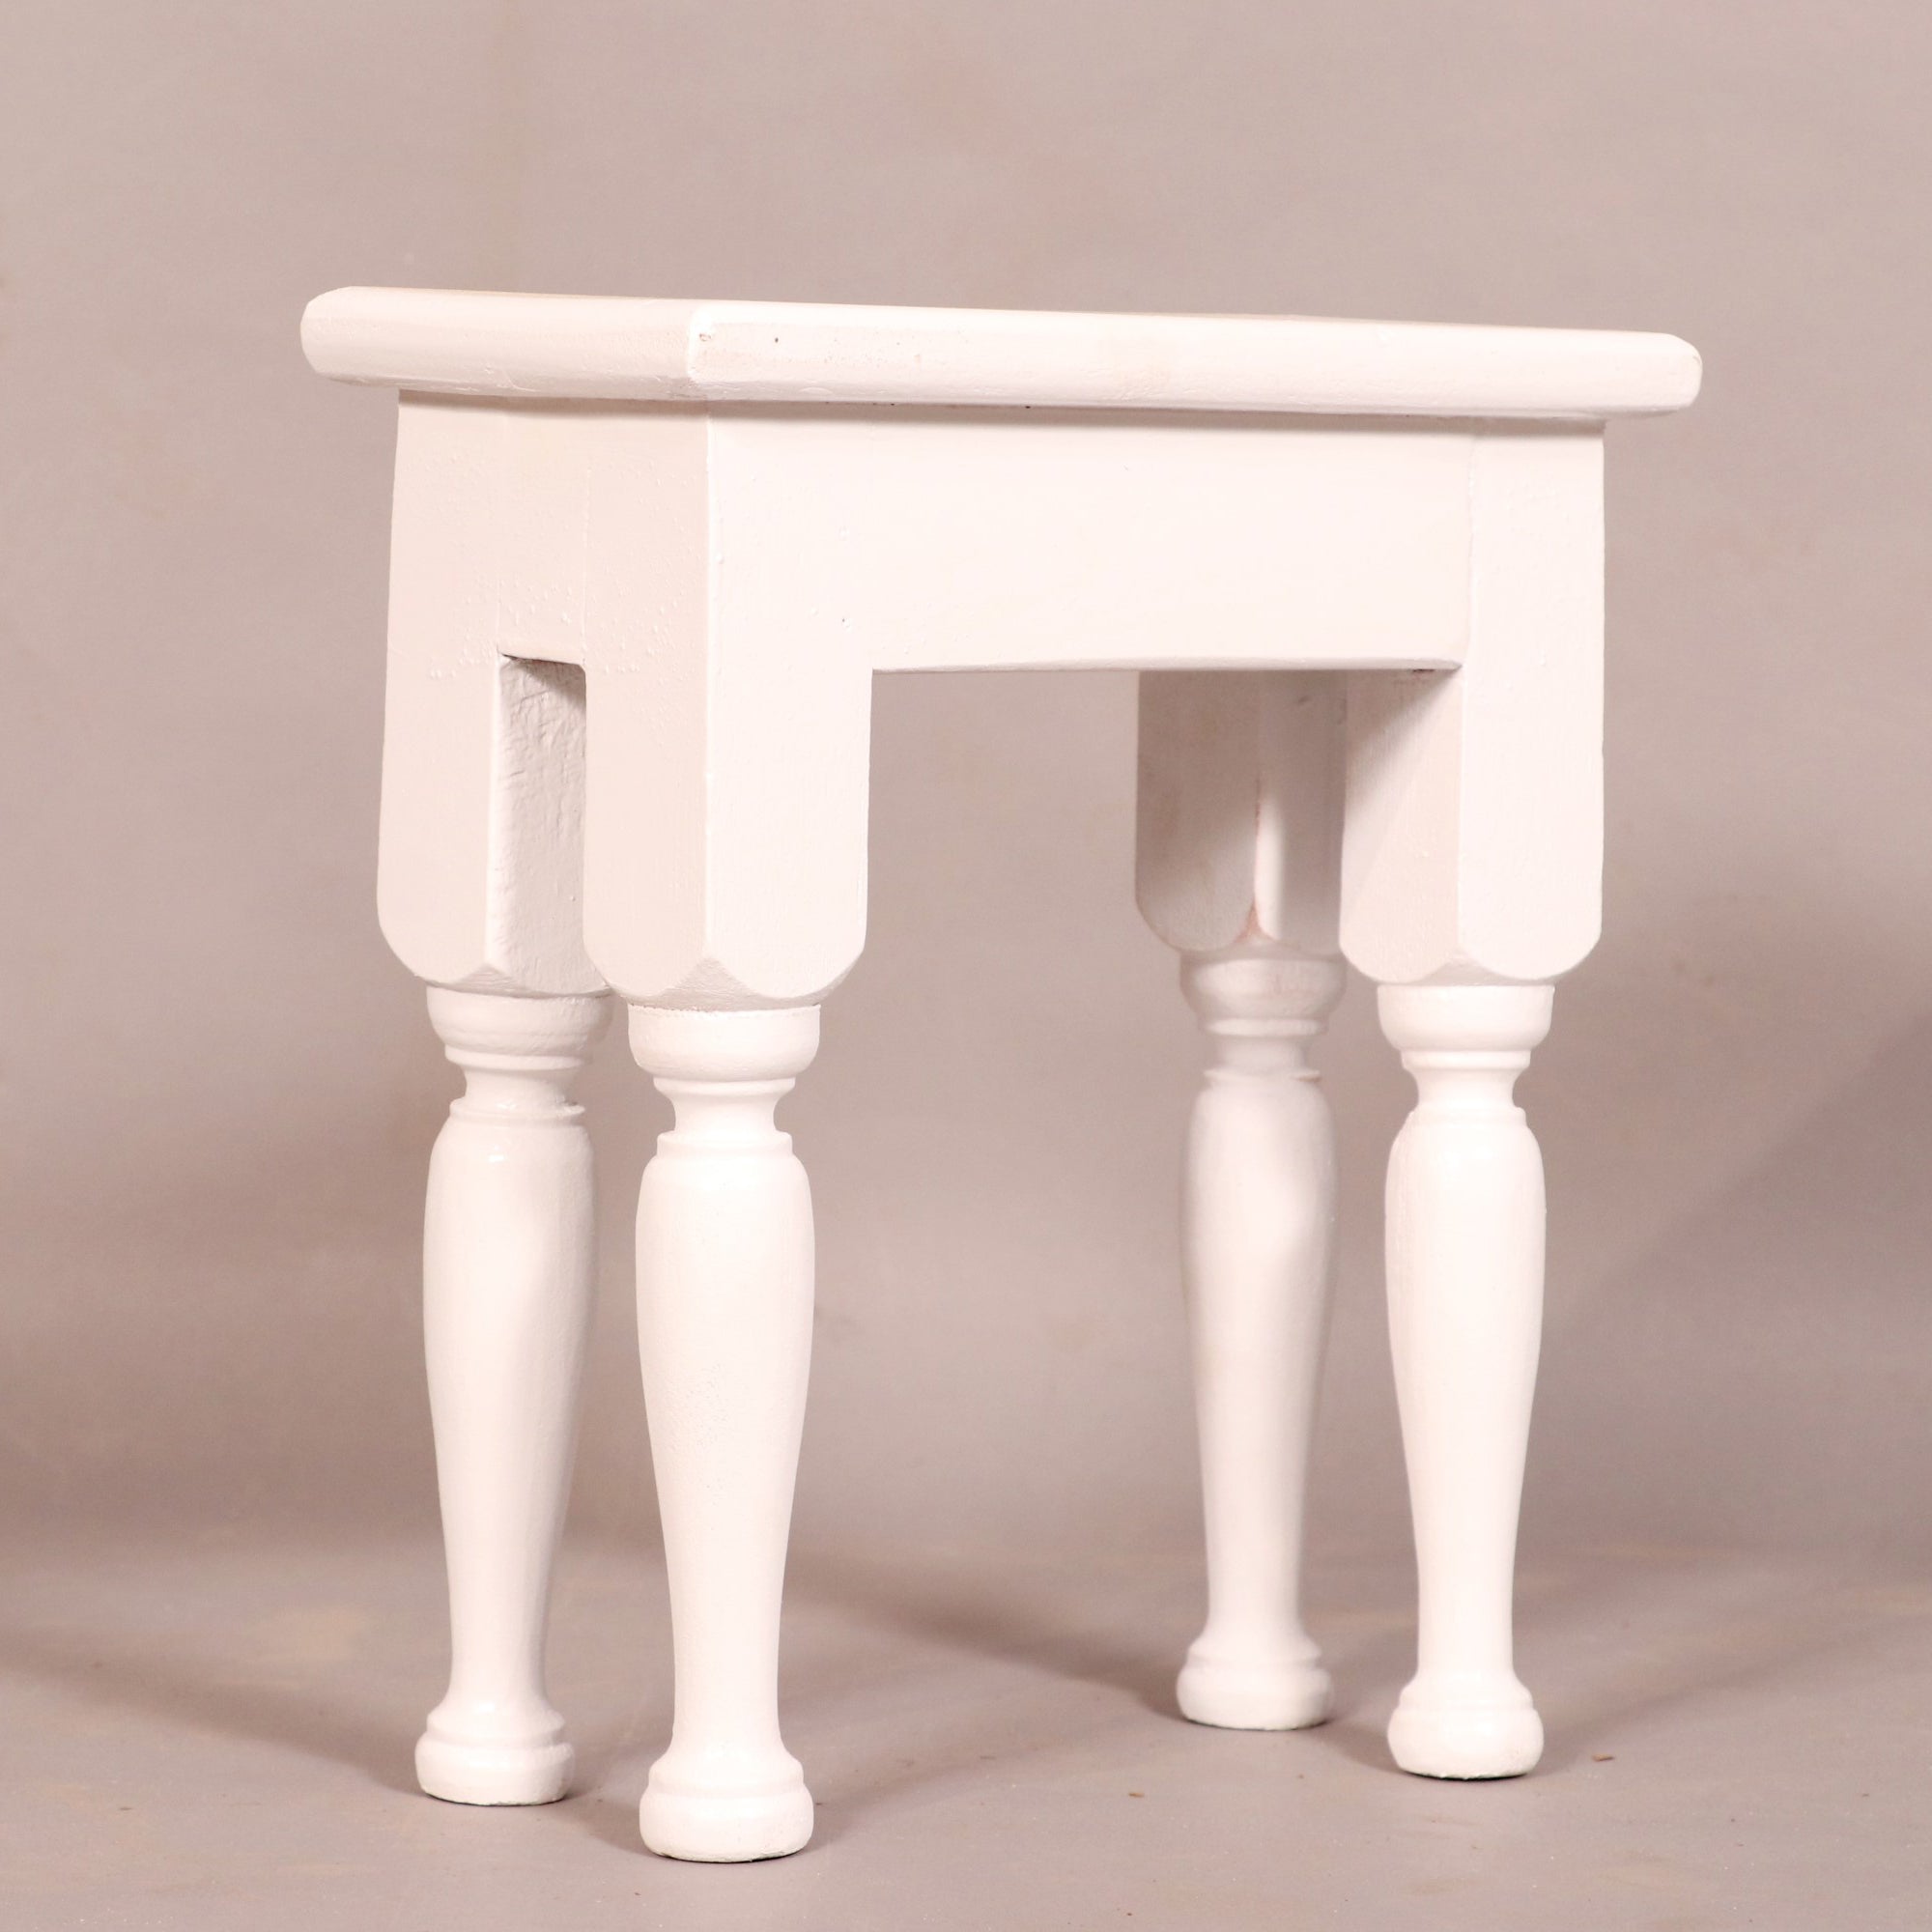 Wooden White painted Stool Traditional Décor